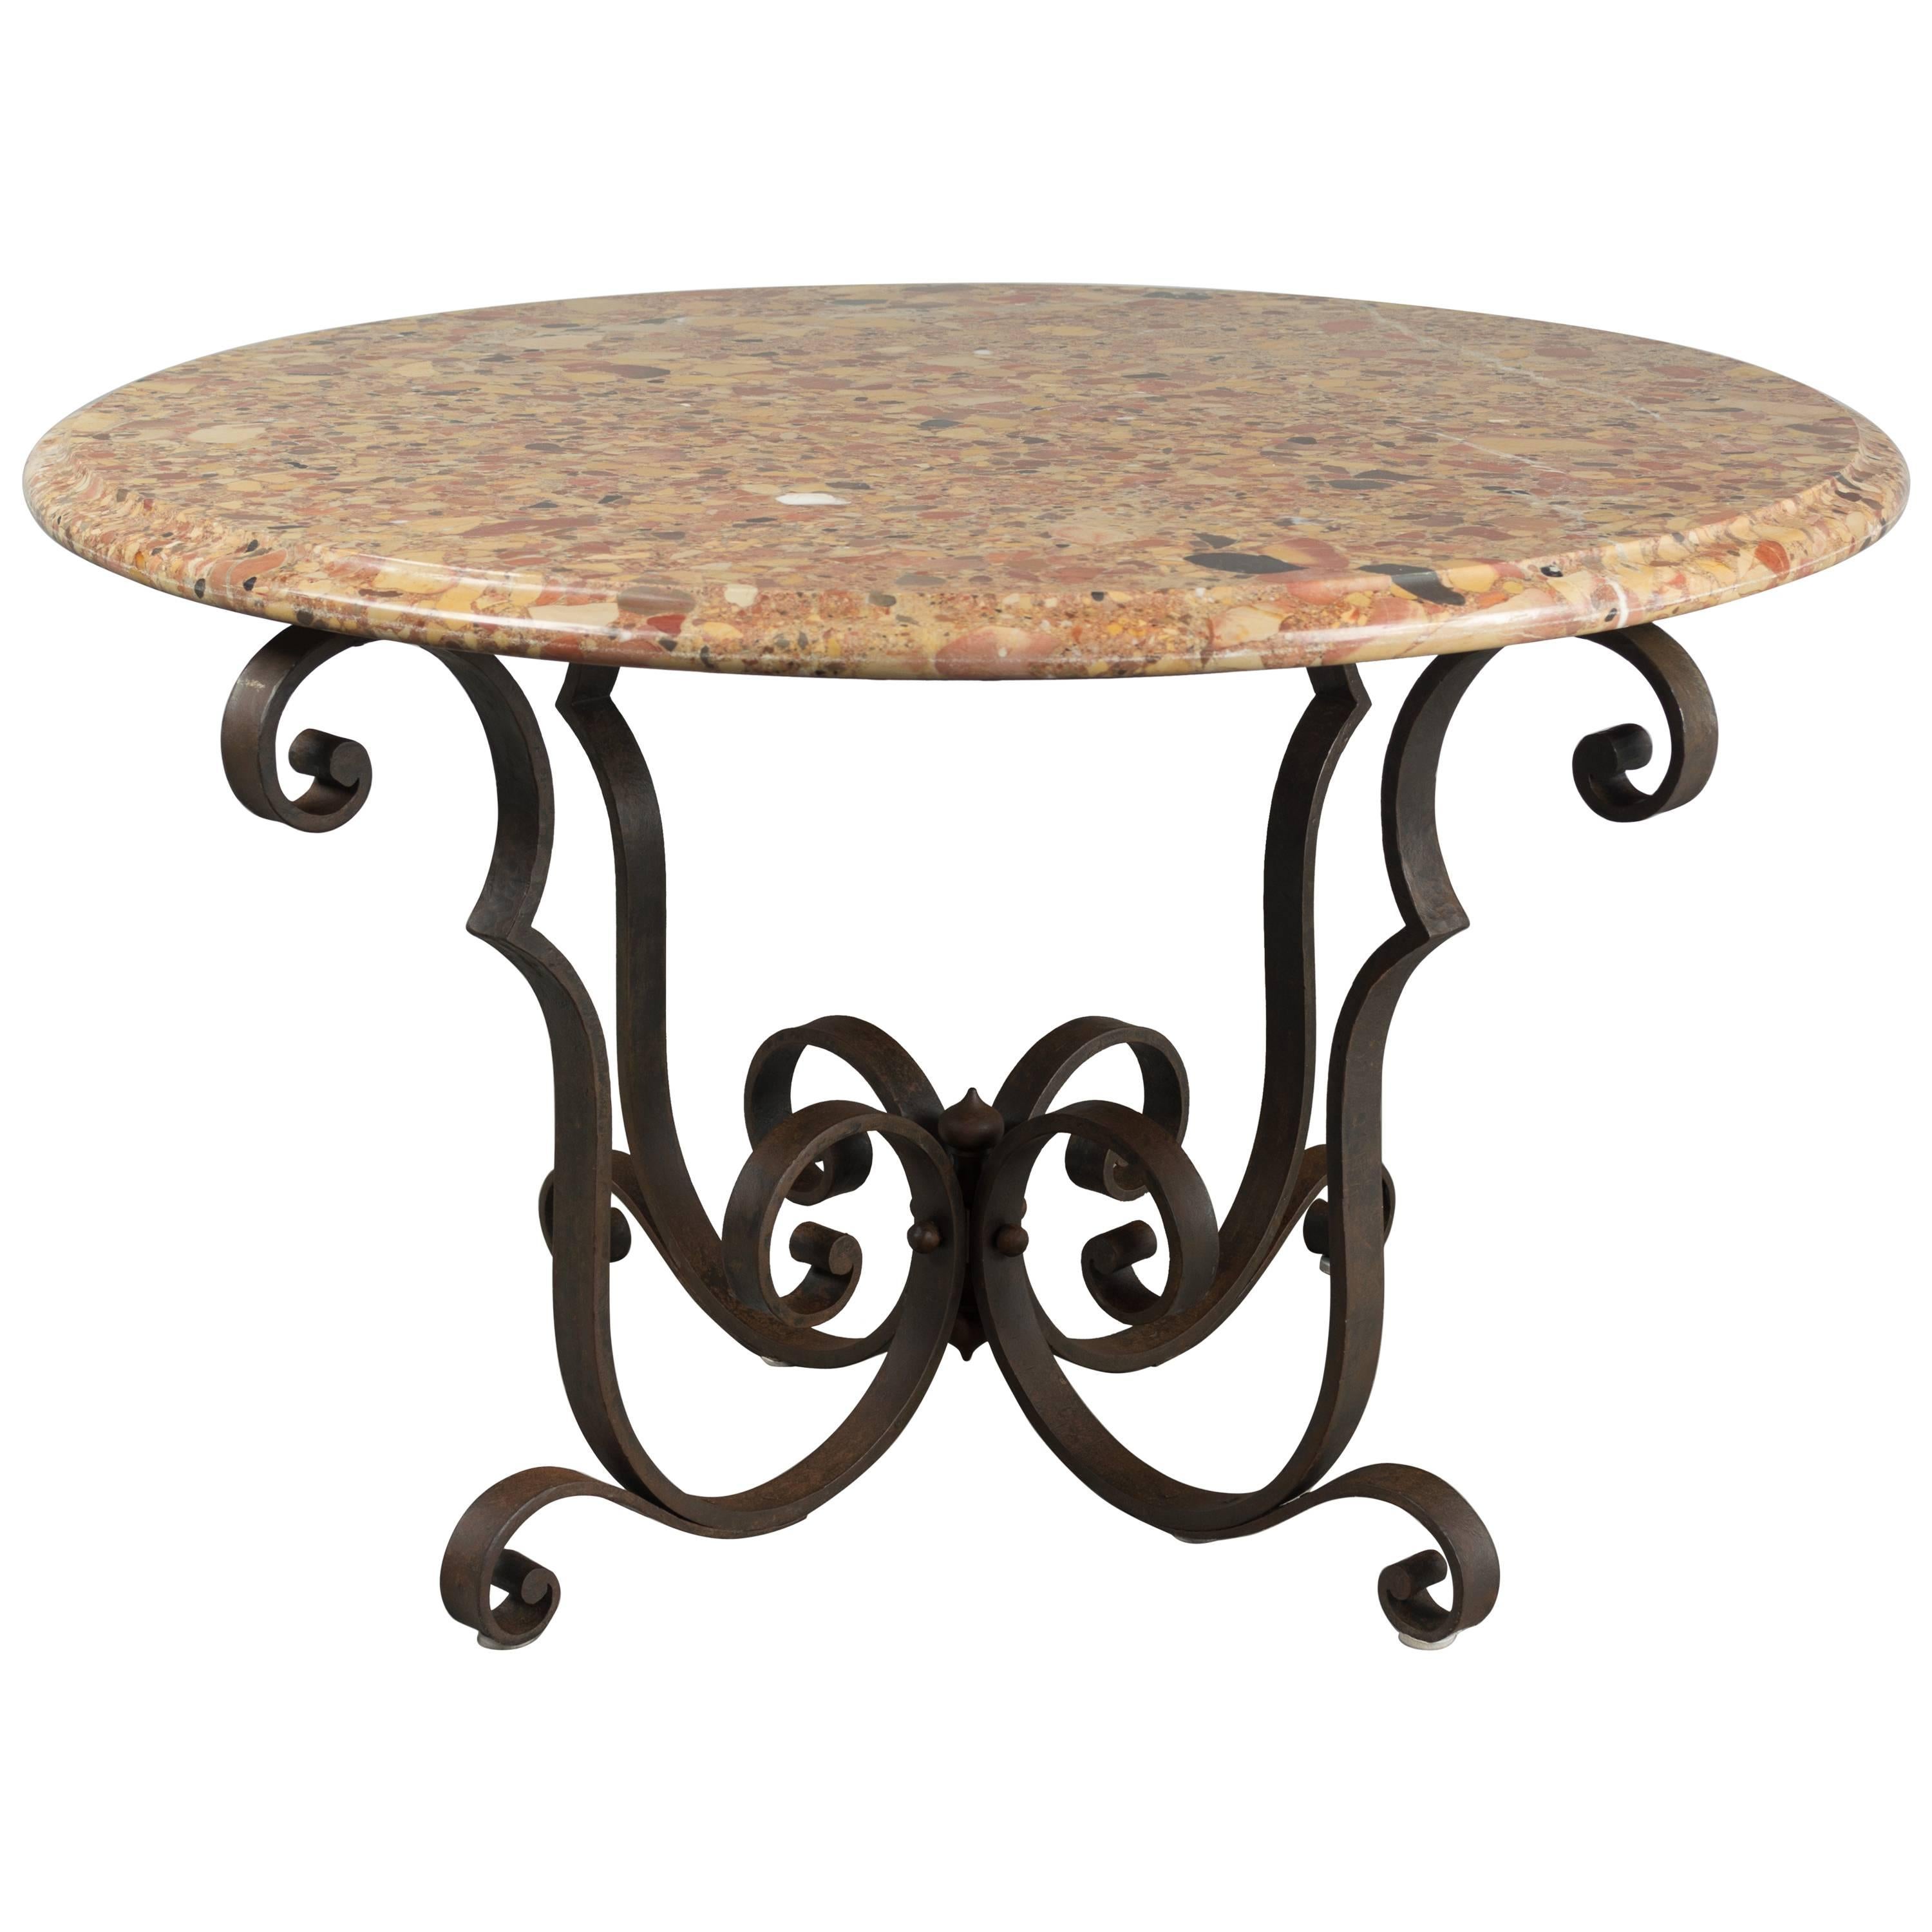 French Art Deco Wrought Iron Marble-Top Table